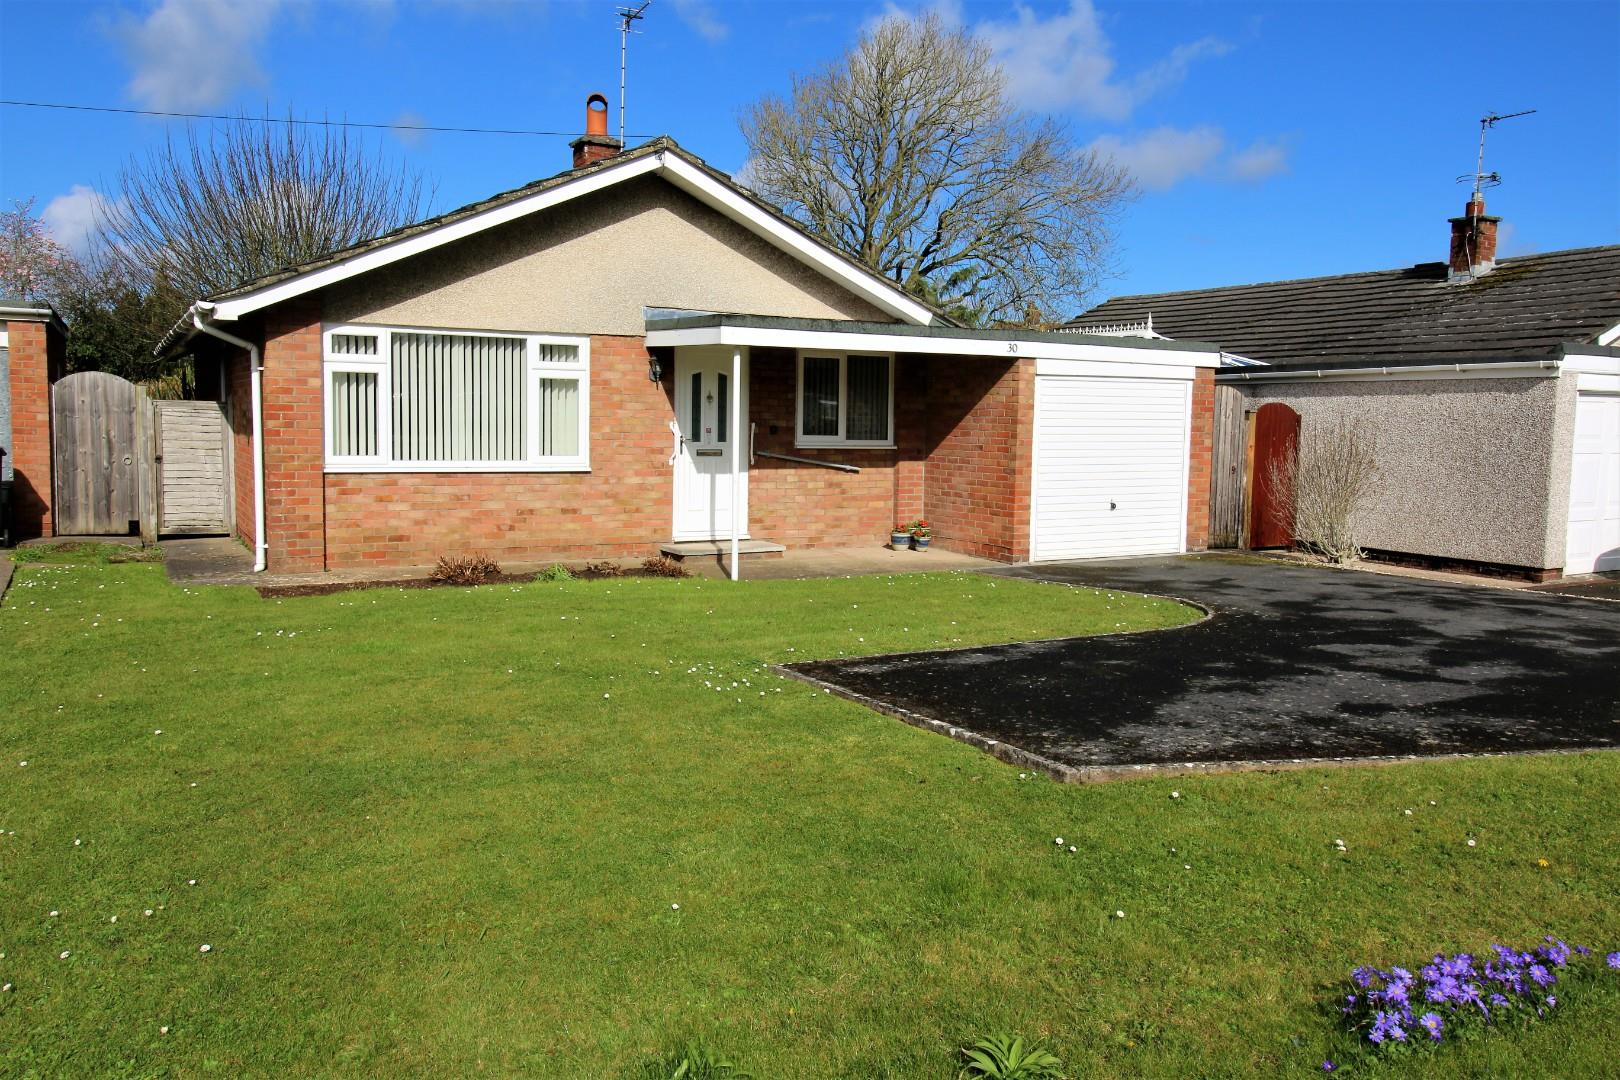 Detached bungalow in the heart of Yatton